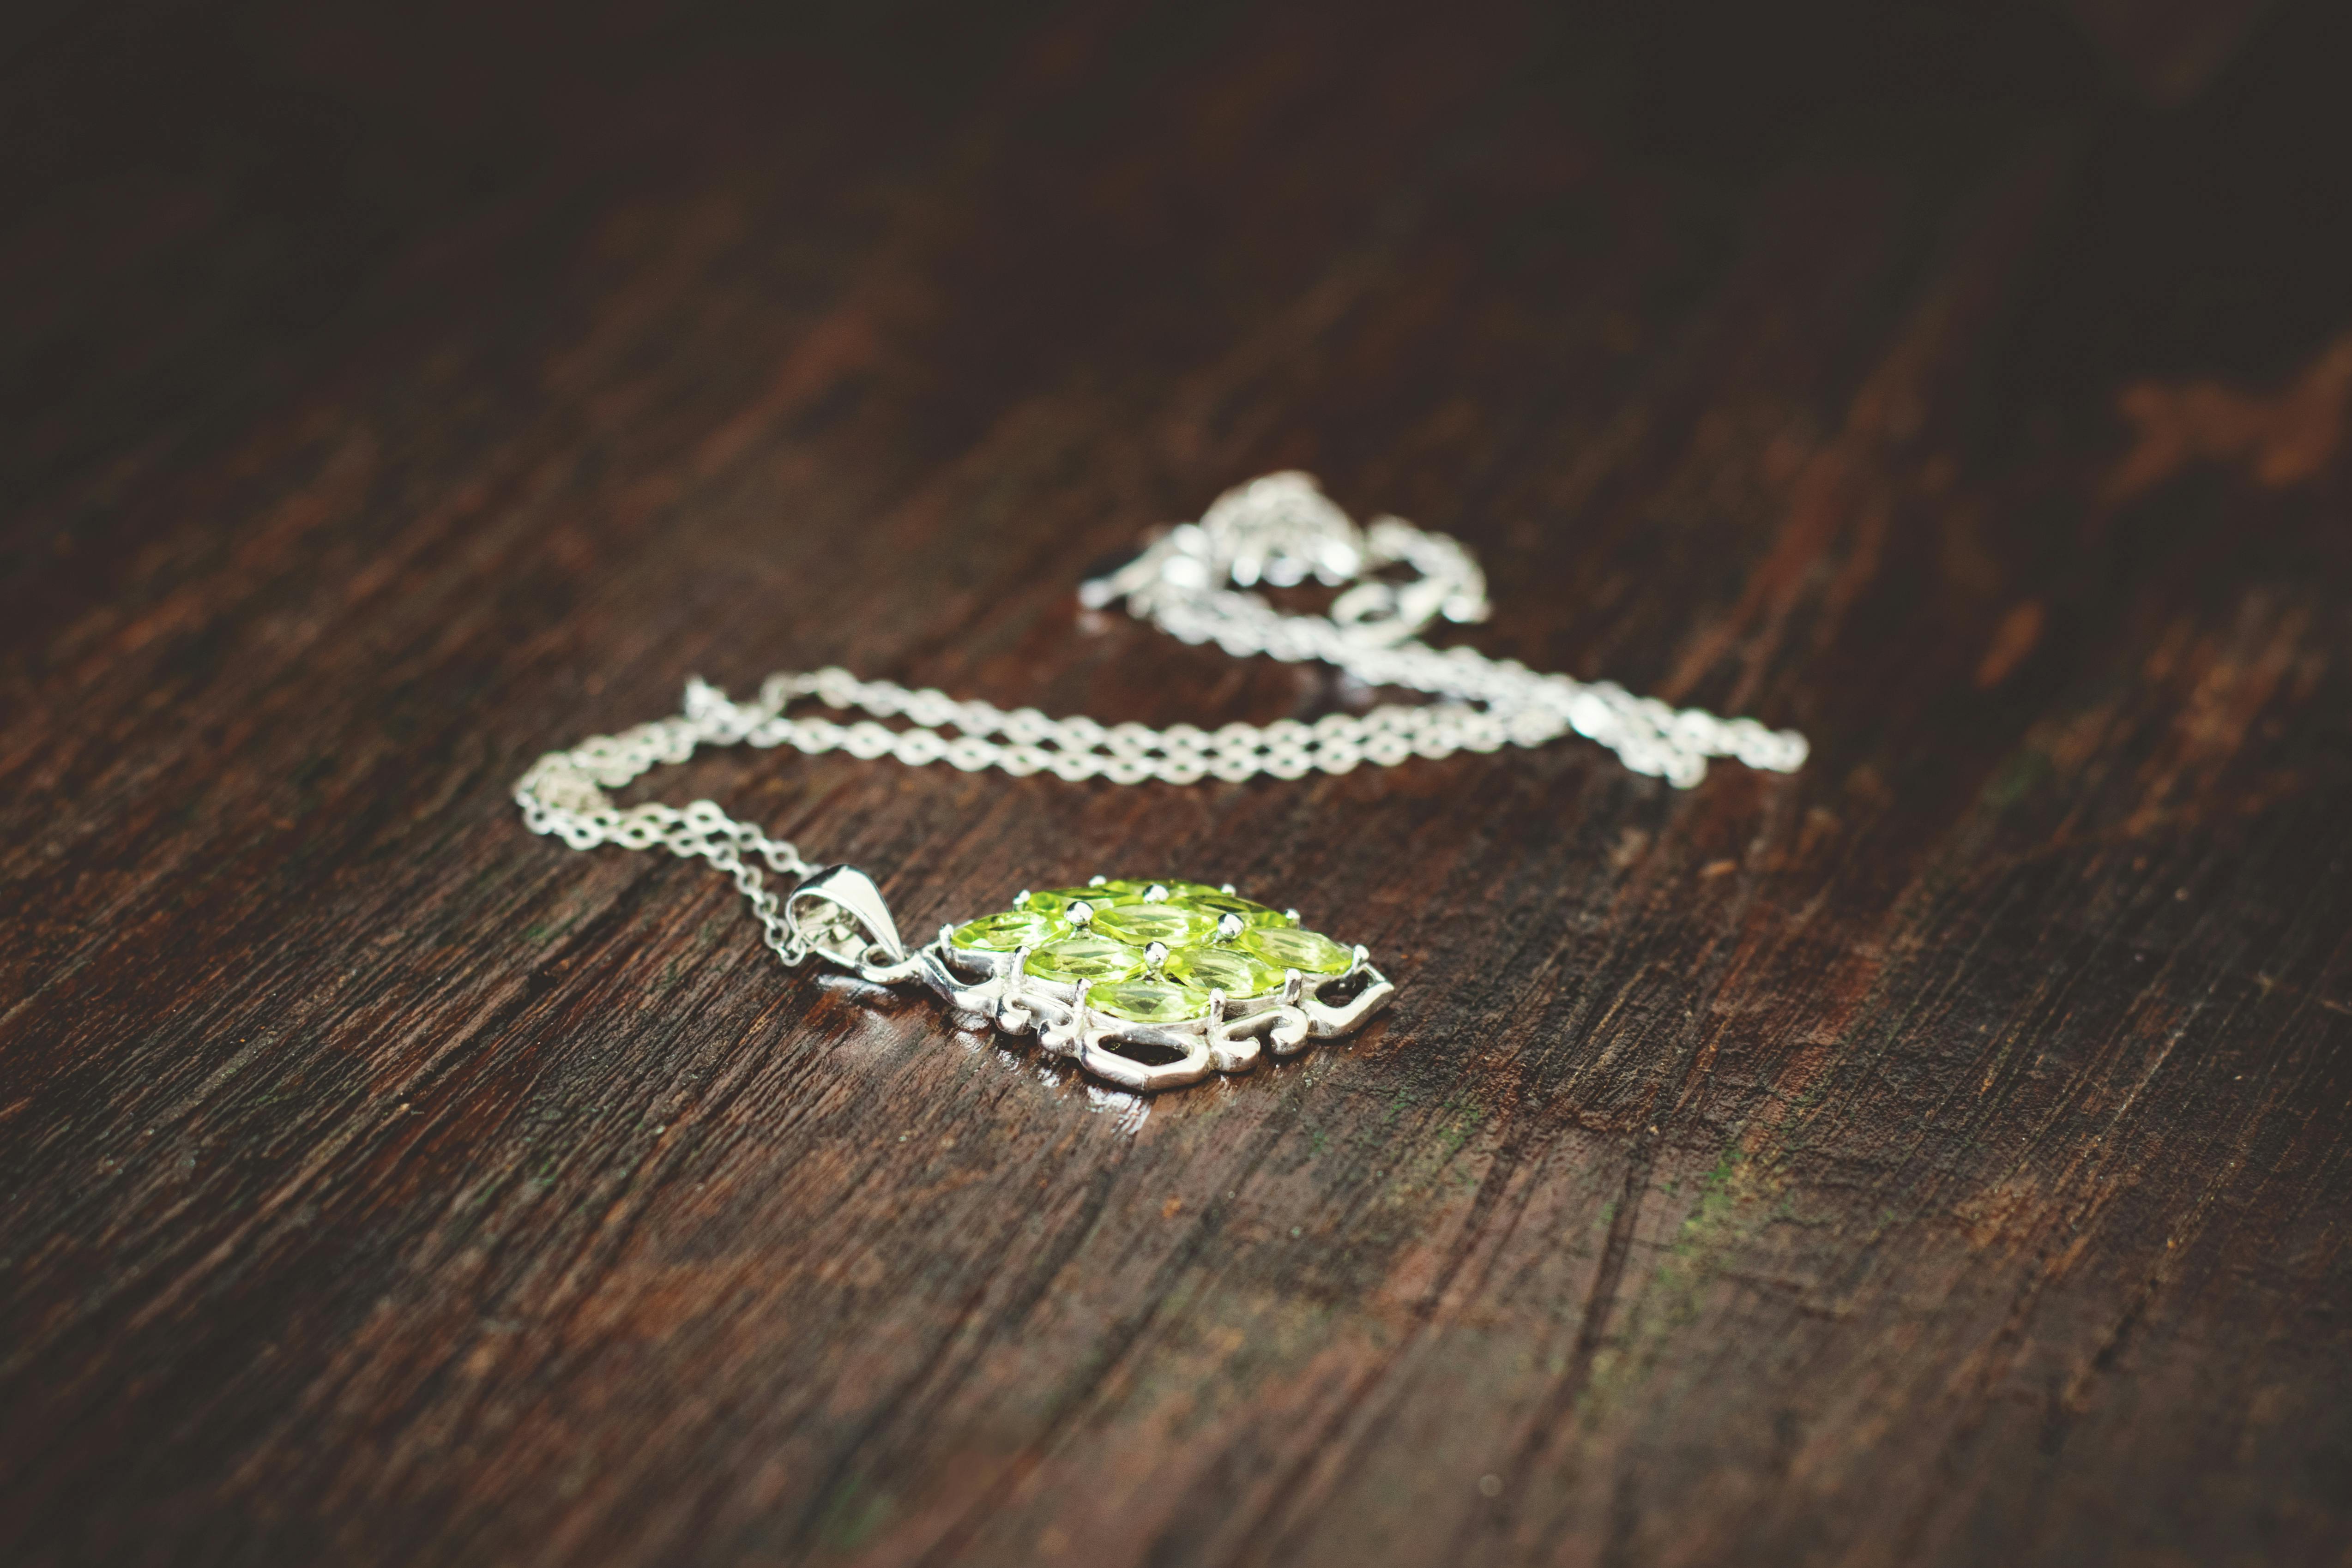 Necklace on the table | Source: Pexels